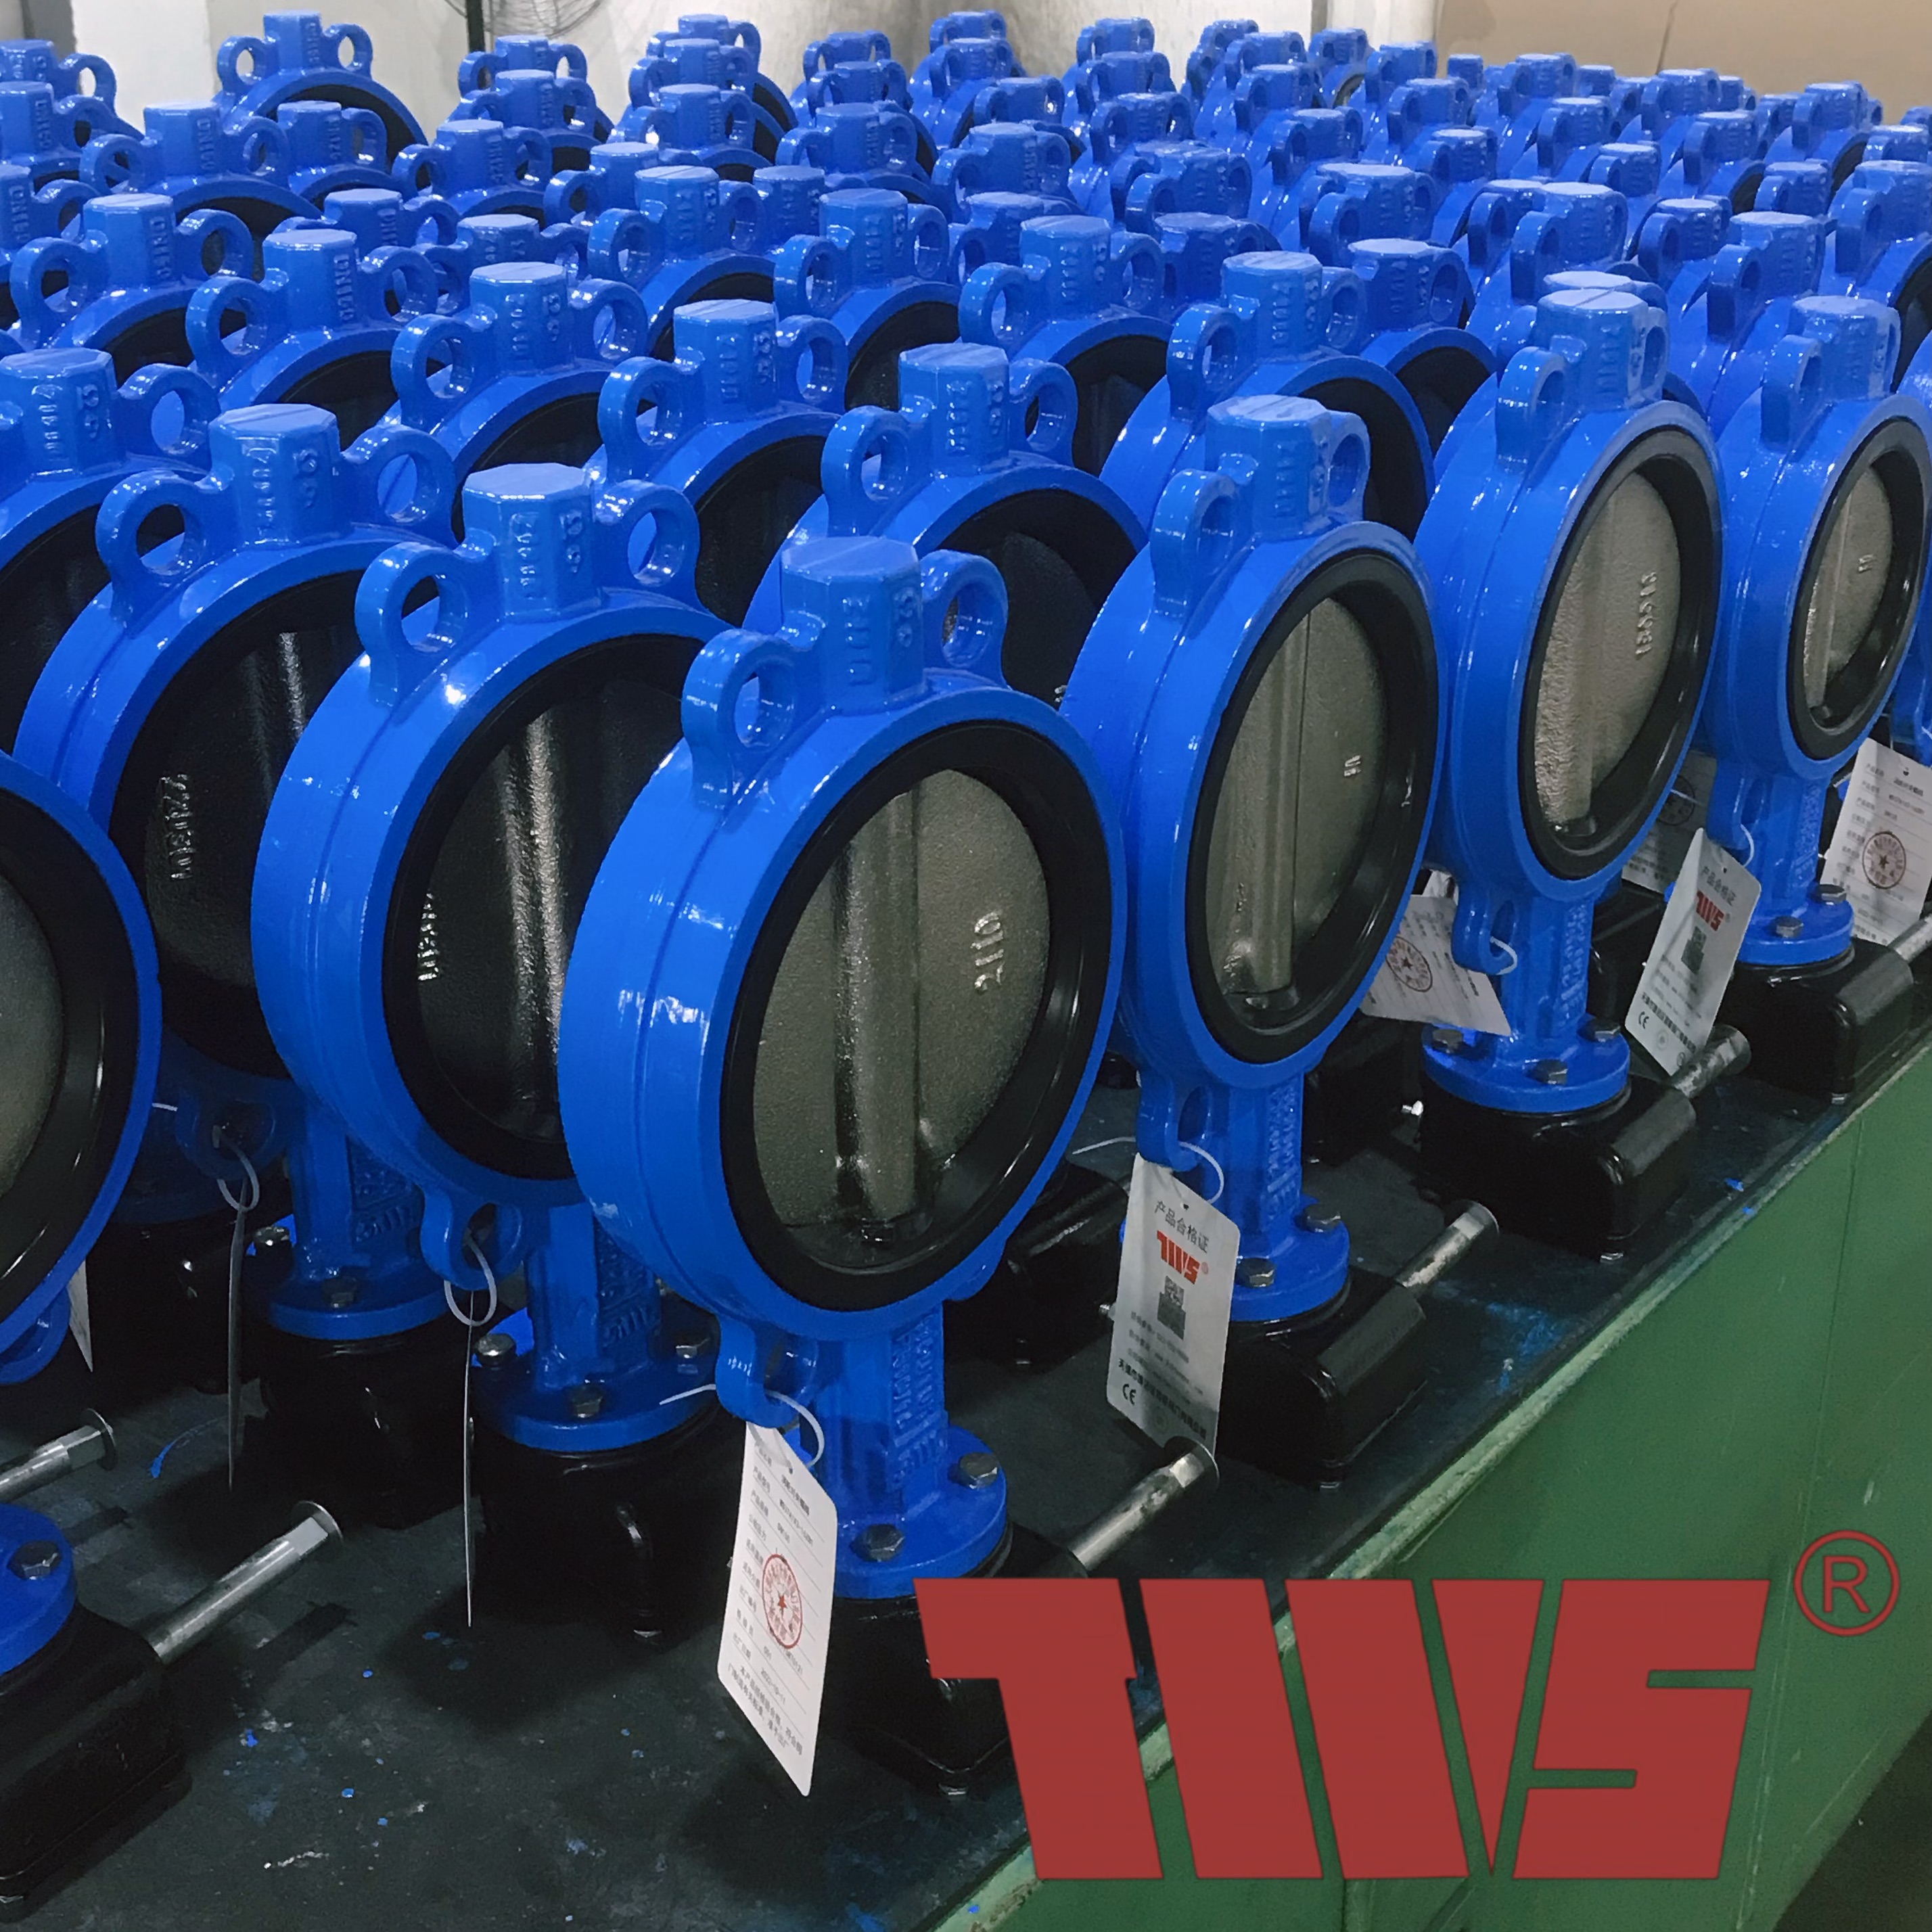 The characteristic of butterfly valves from TWS Valve